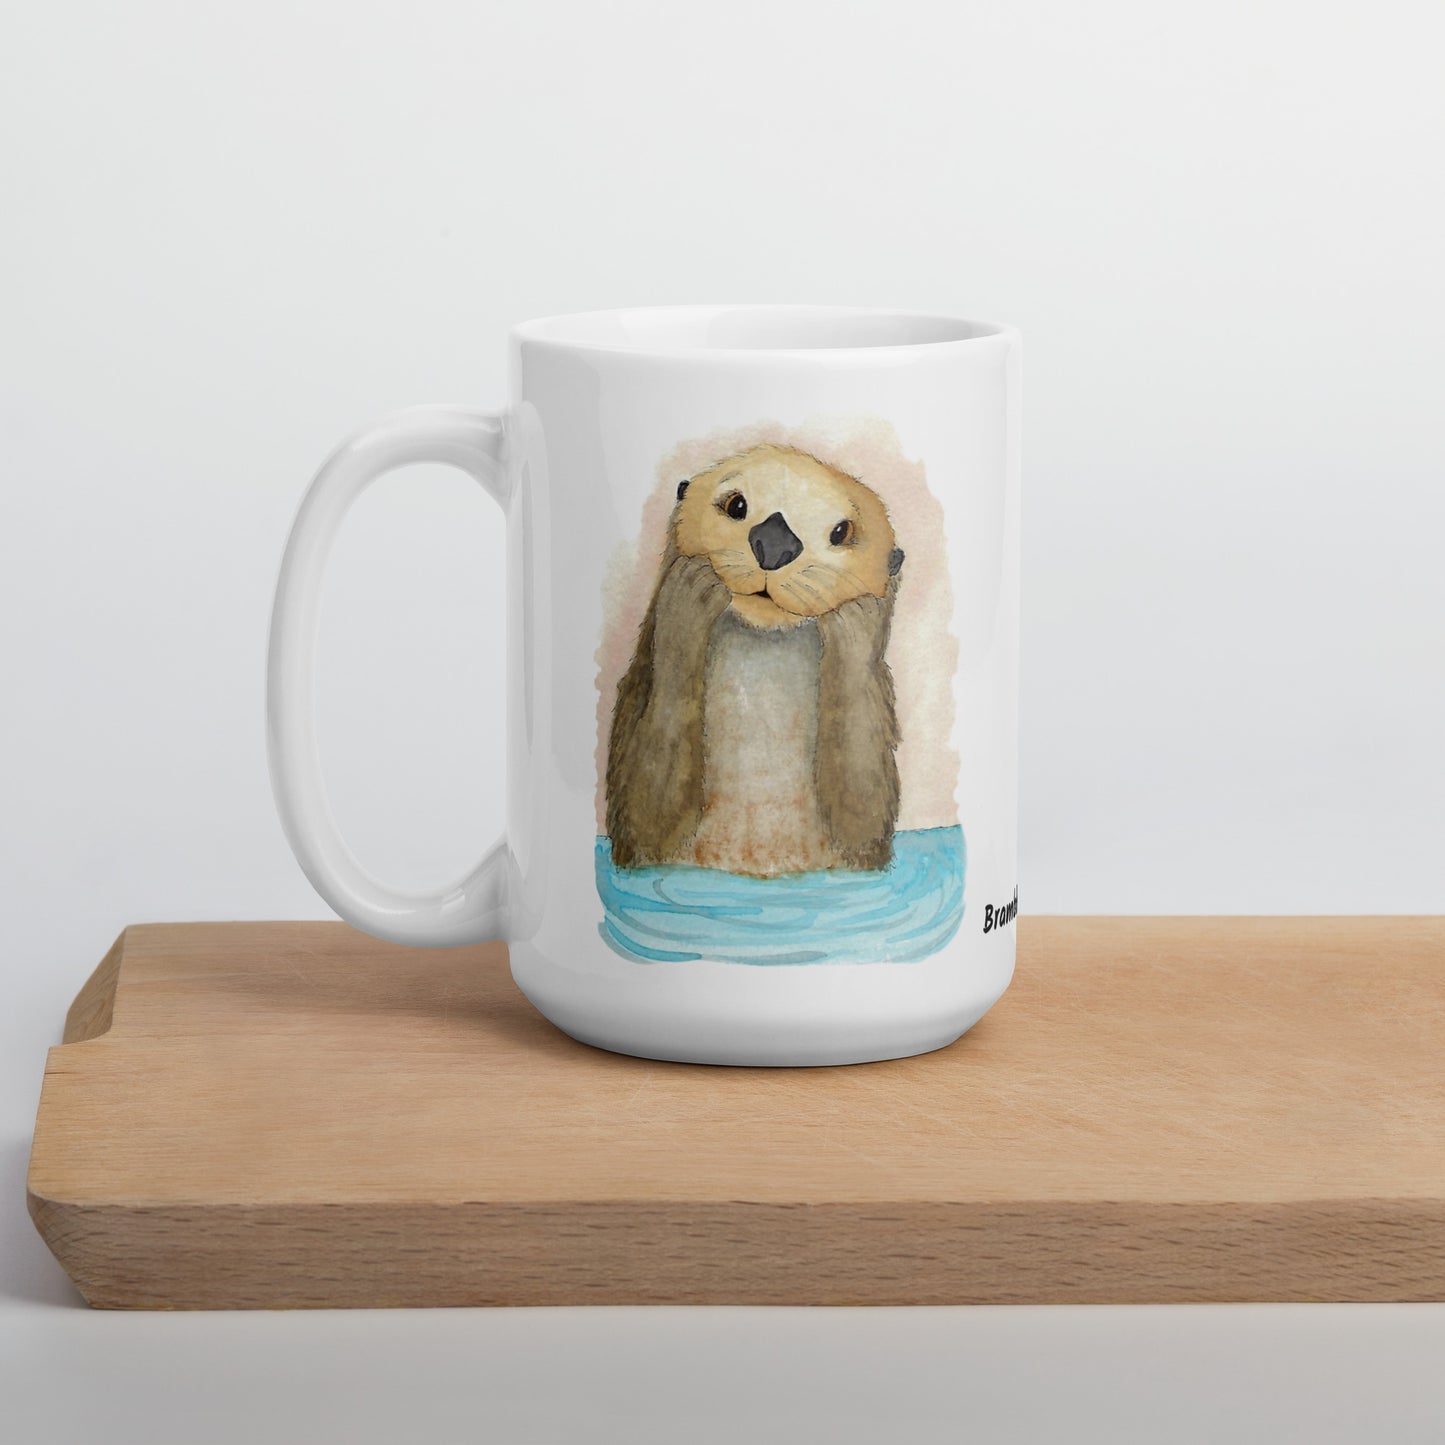 15 ounce white ceramic mug featuring watercolor print of a sea otter on both sides. Dishwasher and microwave safe. Shown on wooden tray.